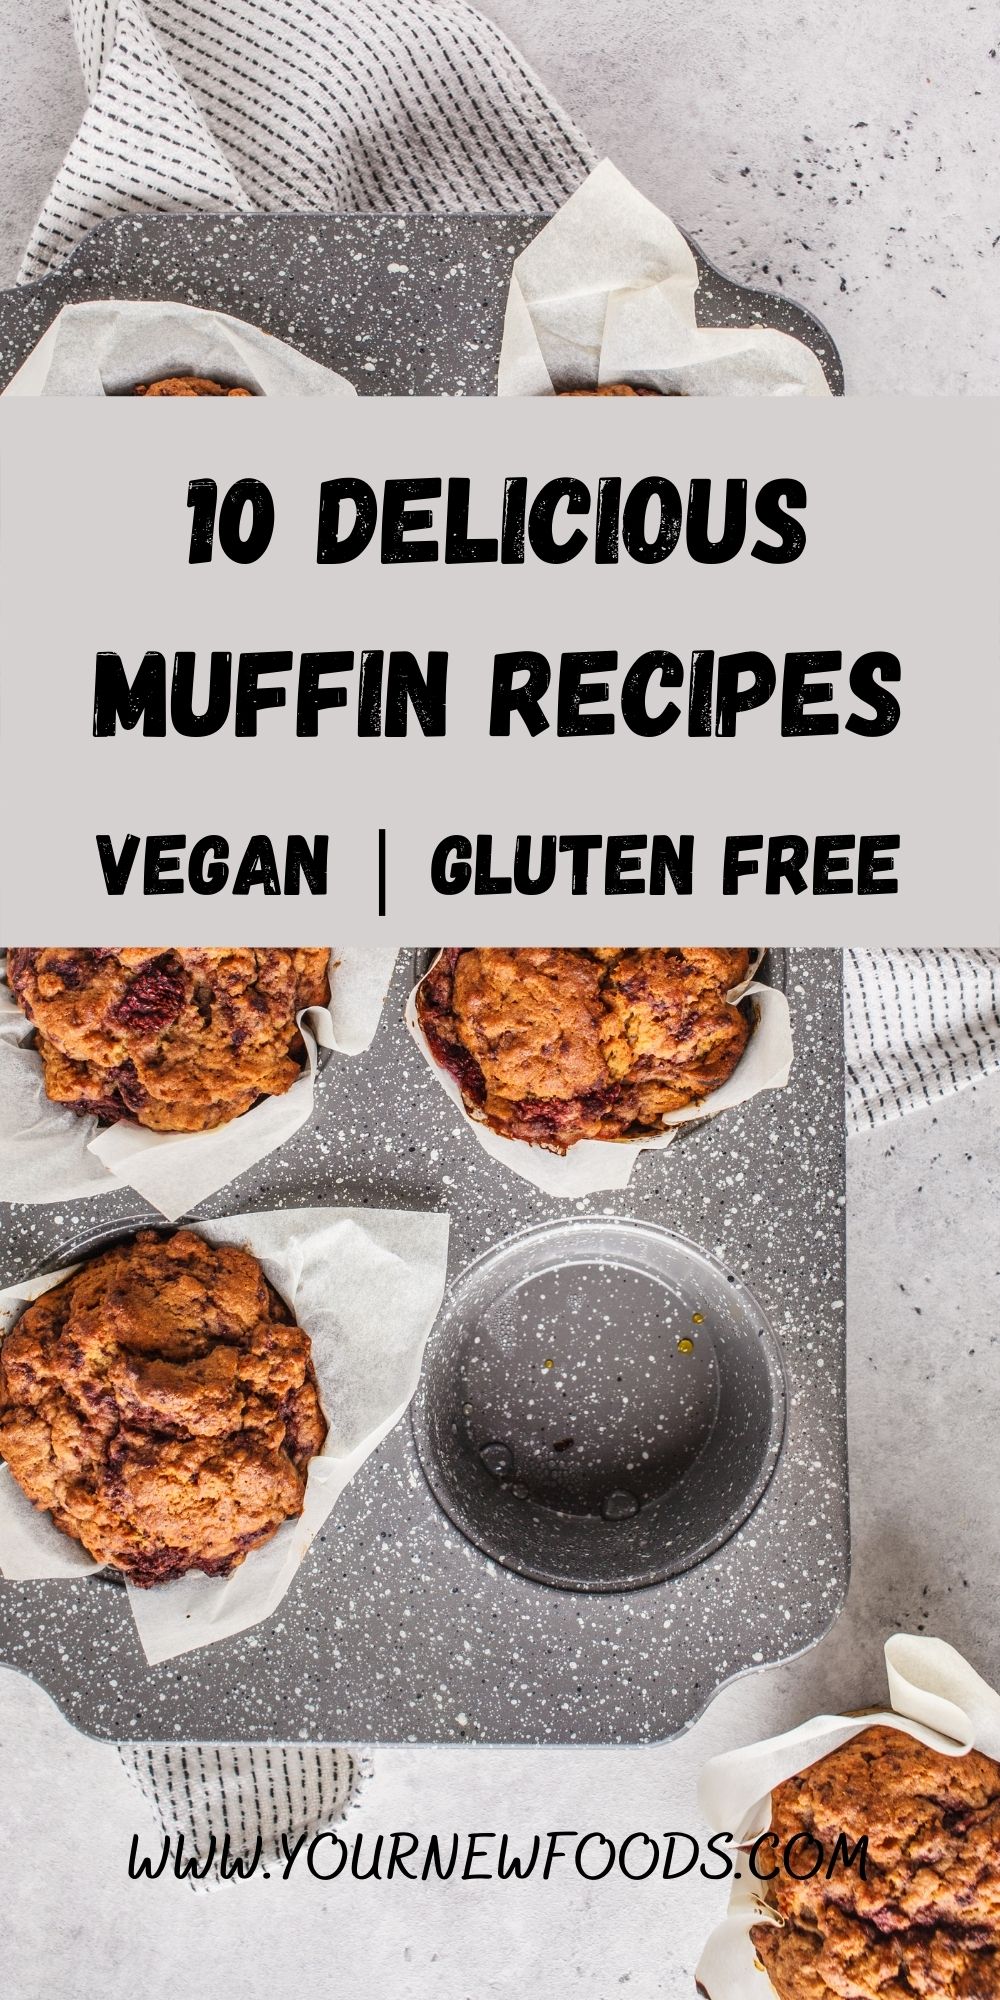 Gluten free and Vegan Muffins on a wooden board